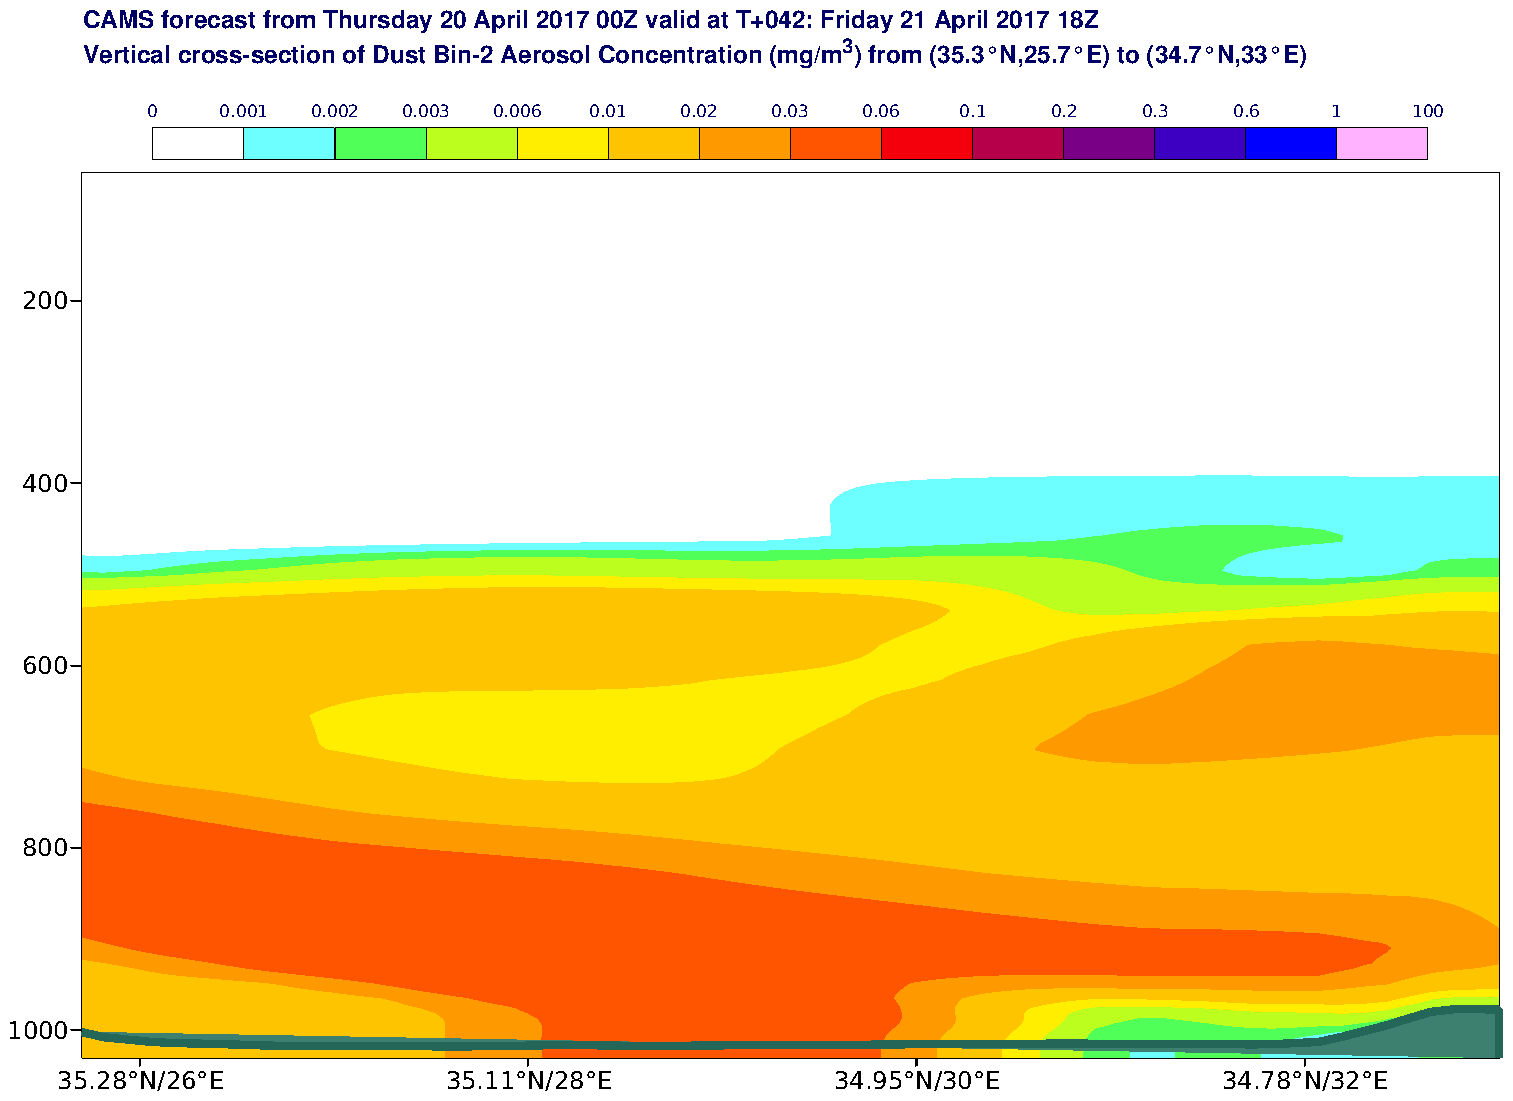 Vertical cross-section of Dust Bin-2 Aerosol Concentration (mg/m3) valid at T42 - 2017-04-21 18:00